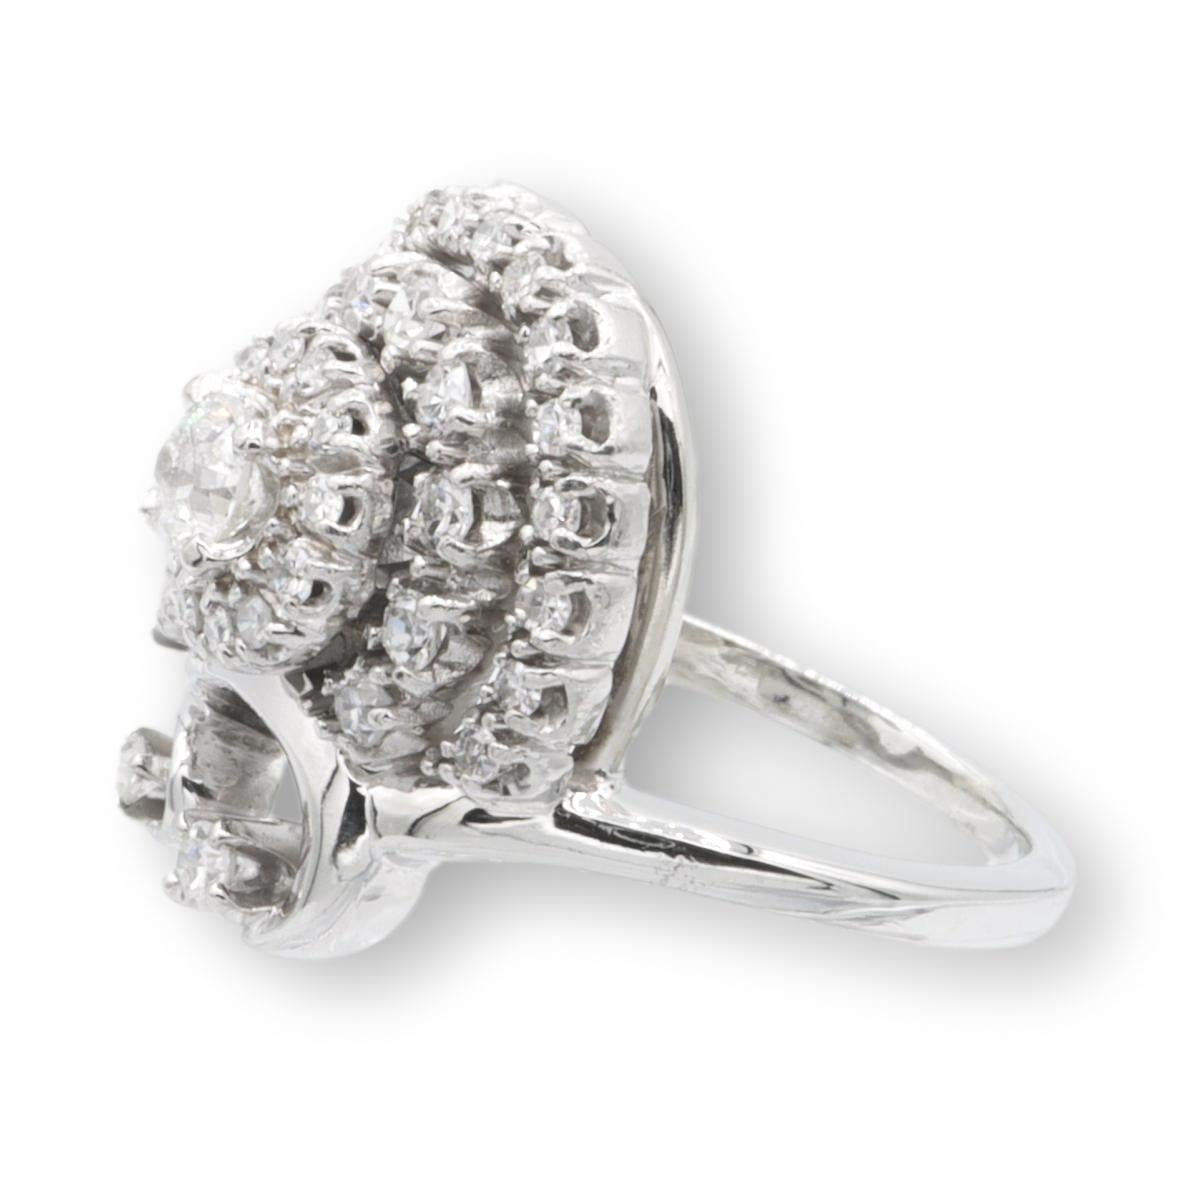 Vintage Jabel cocktail ring finely crafted in 14 karat white gold featuring one old european cut center diamond weighing 0.15 carats approximately surrounded by 35 single cut diamonds weighing 0.50 carats approximately, G-H color VS-SI clarity.